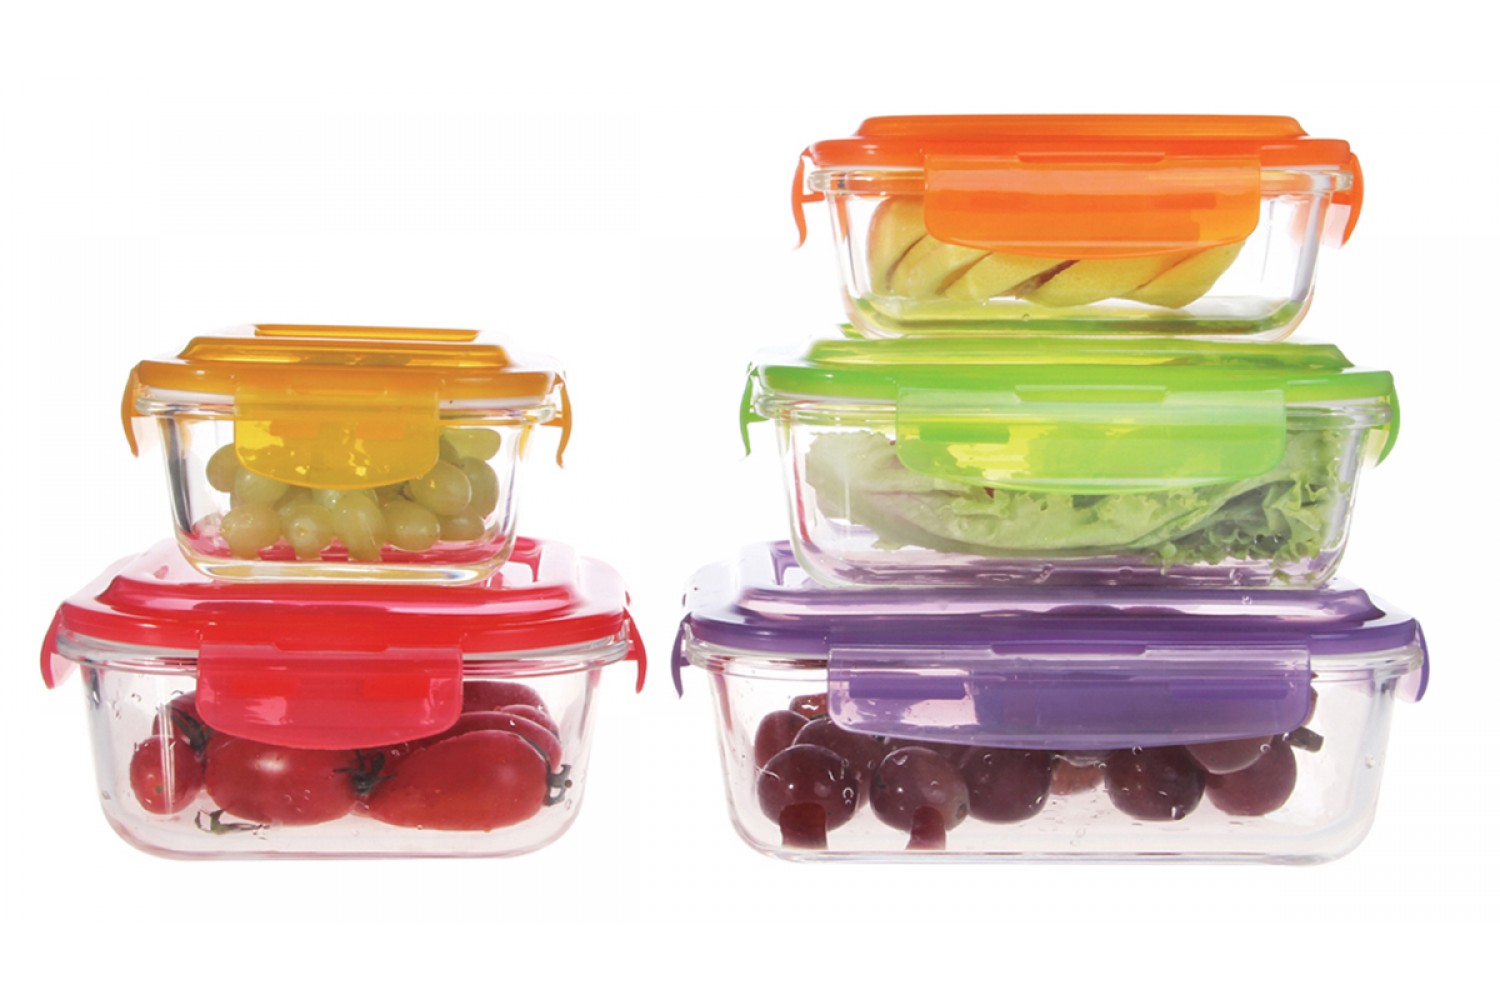 10PC GLASS FOOD CONTAINER SET